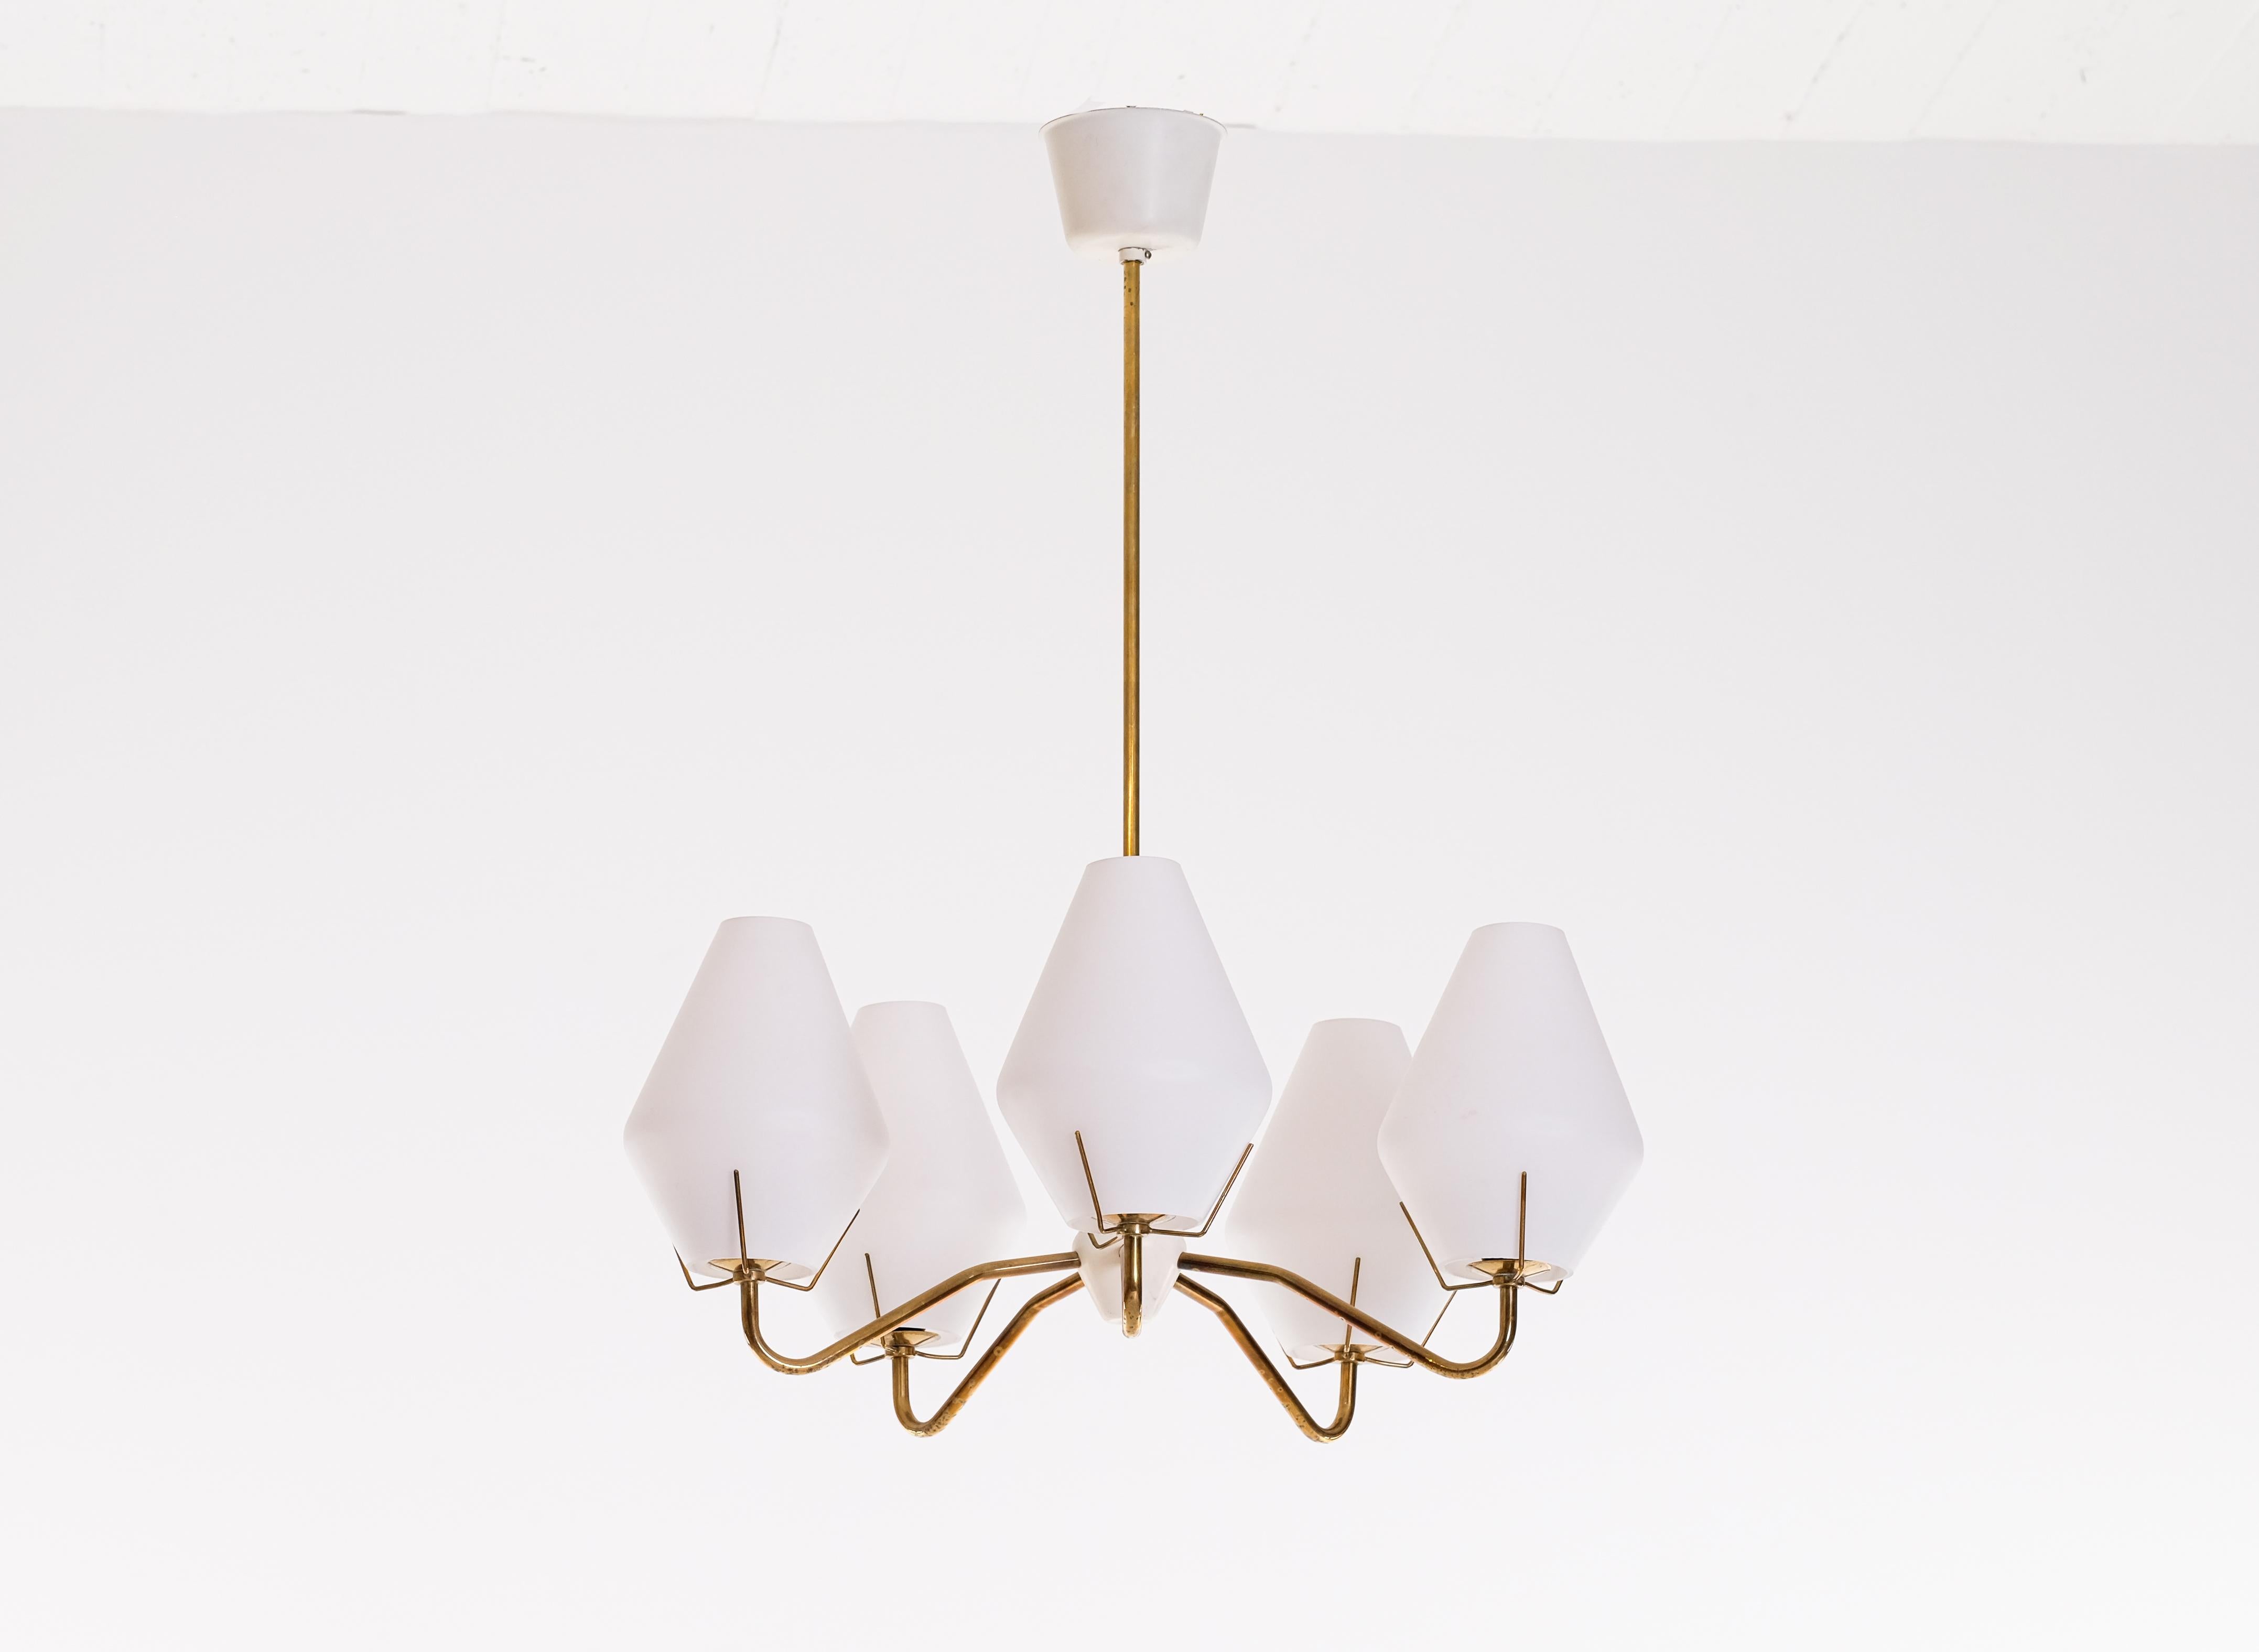 Set of 2 Brass Chandeliers by ASEA, Sweden, 1950s For Sale 3